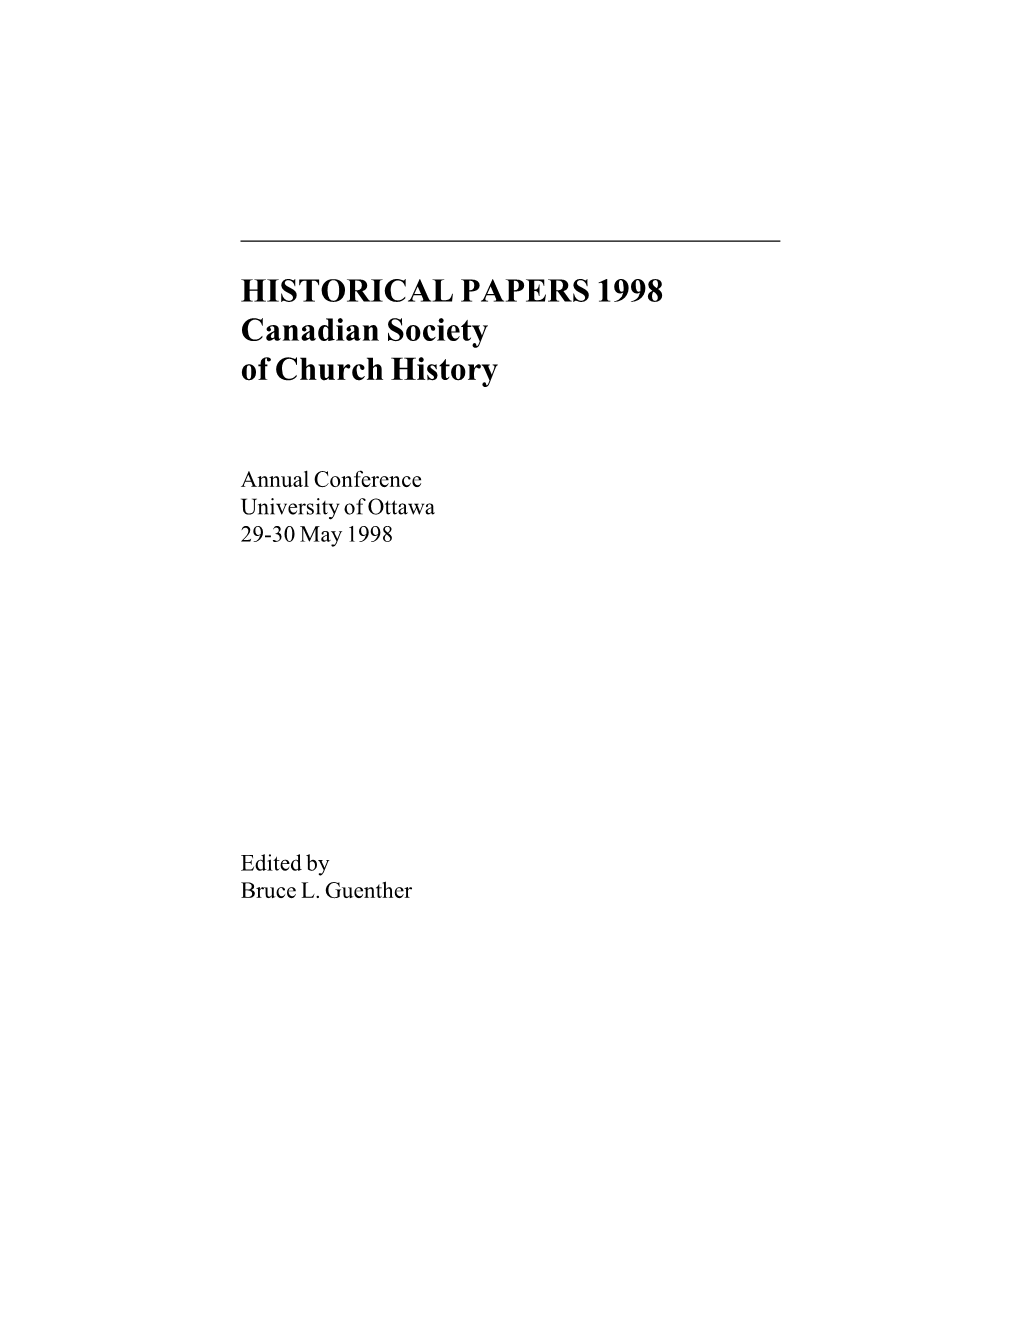 HISTORICAL PAPERS 1998 Canadian Society of Church History